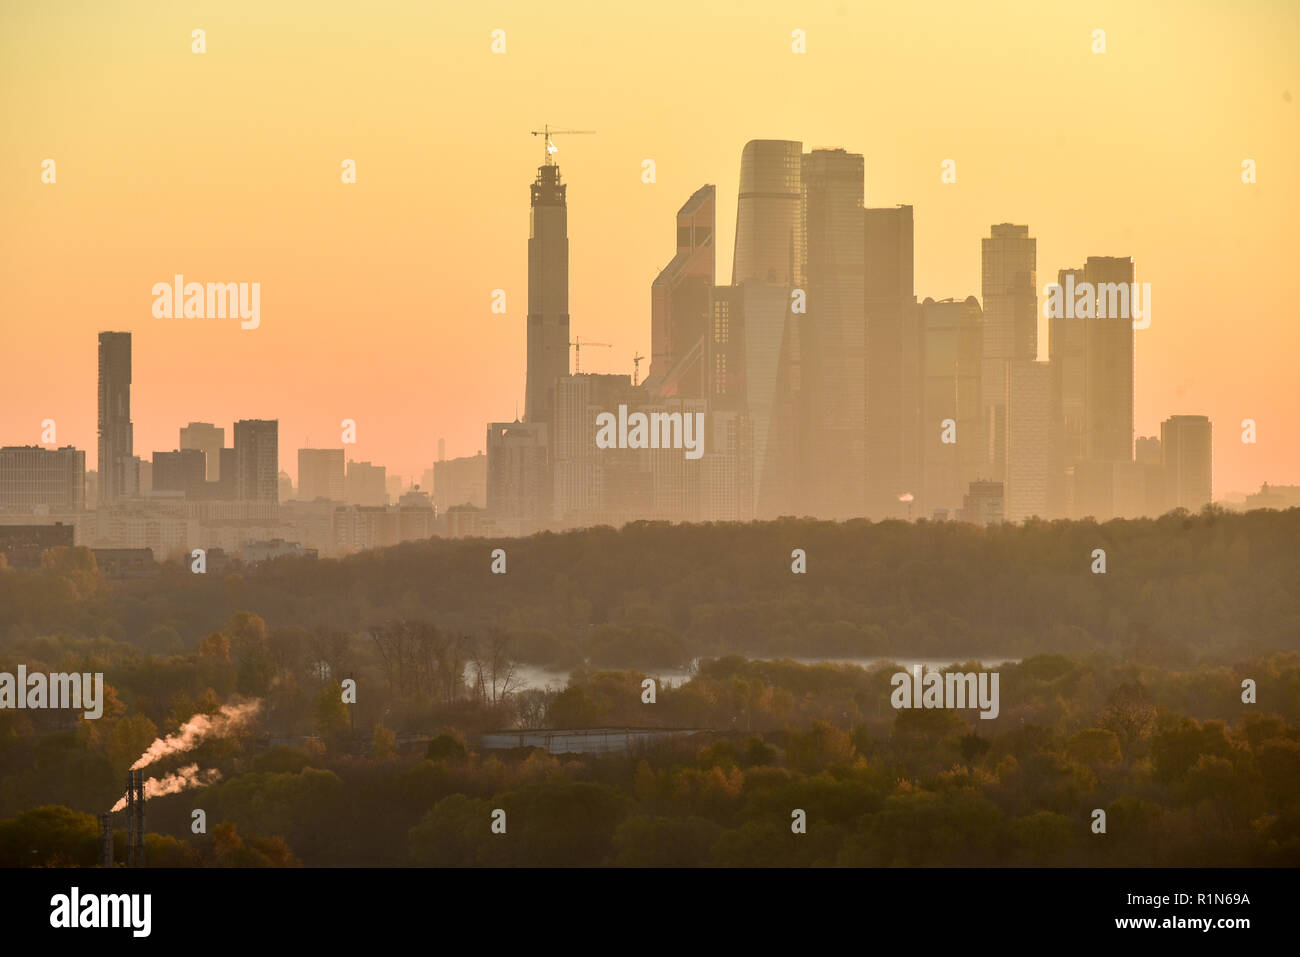 Skyline view of the Moscow International Business Center at dawn. Stock Photo